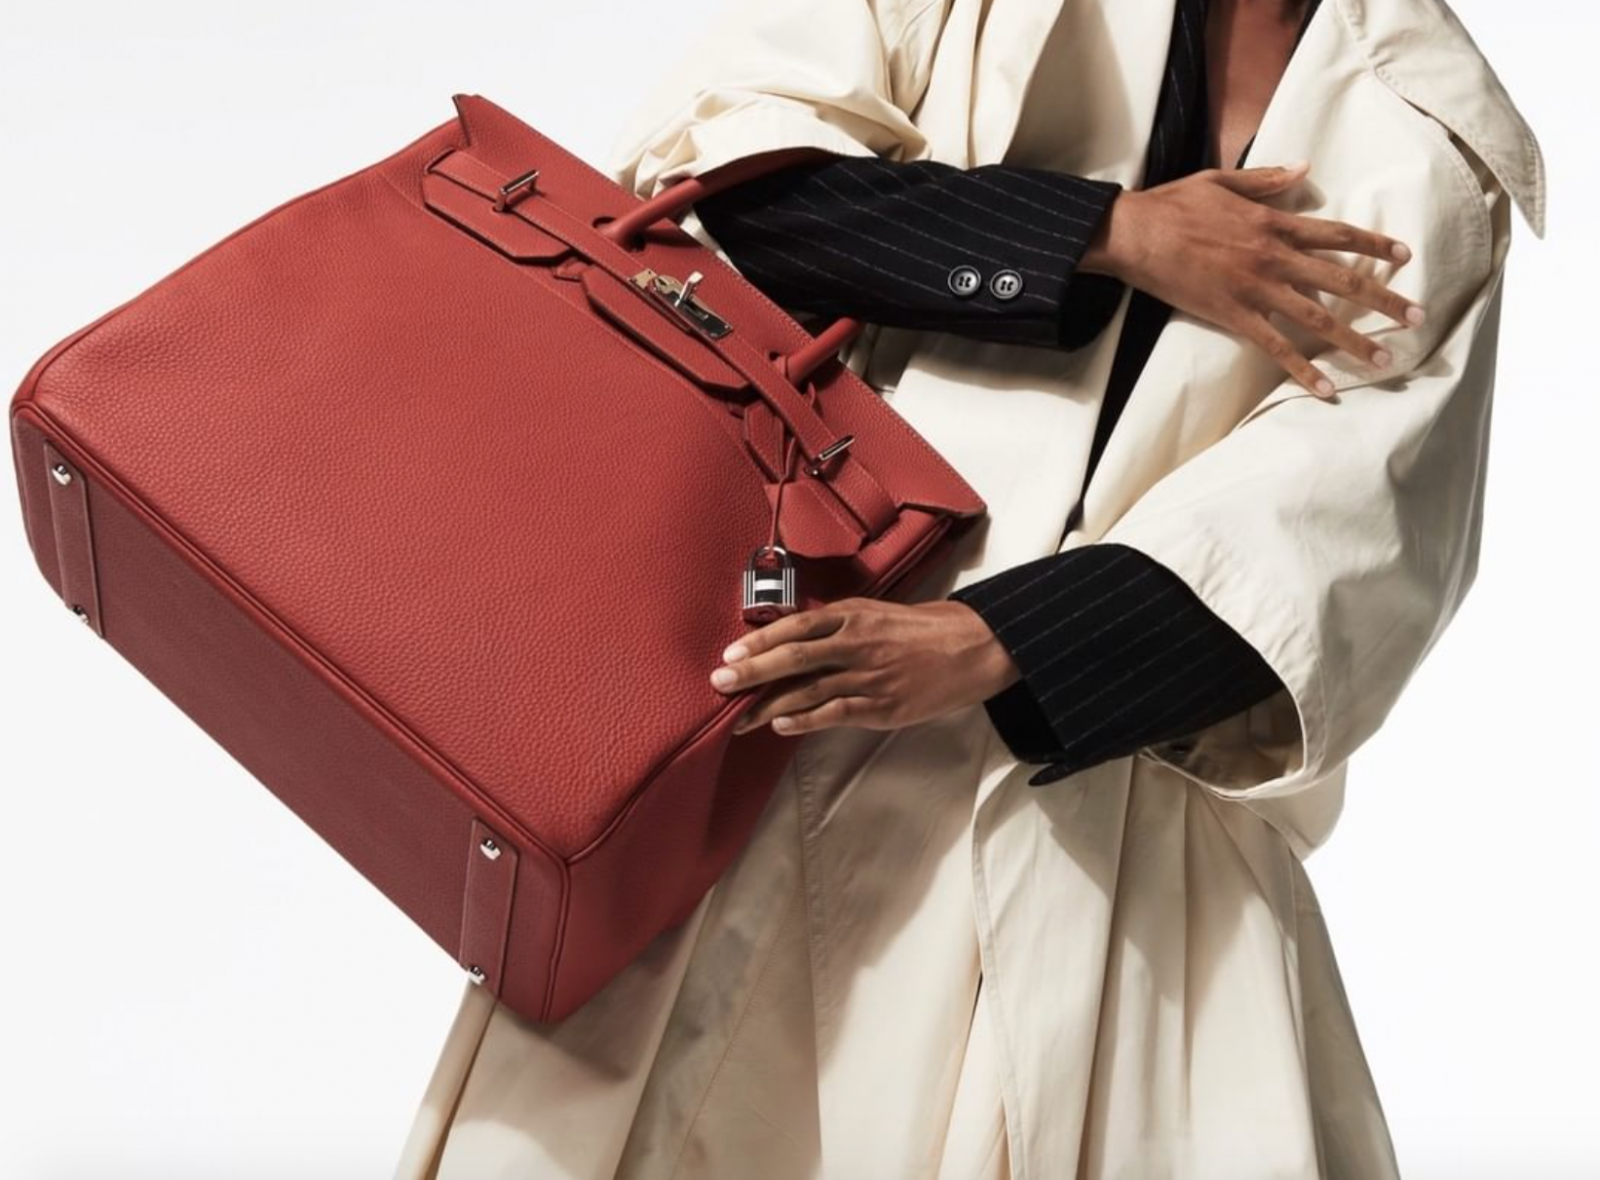 Louis Vuitton set to defend stake in Hermes